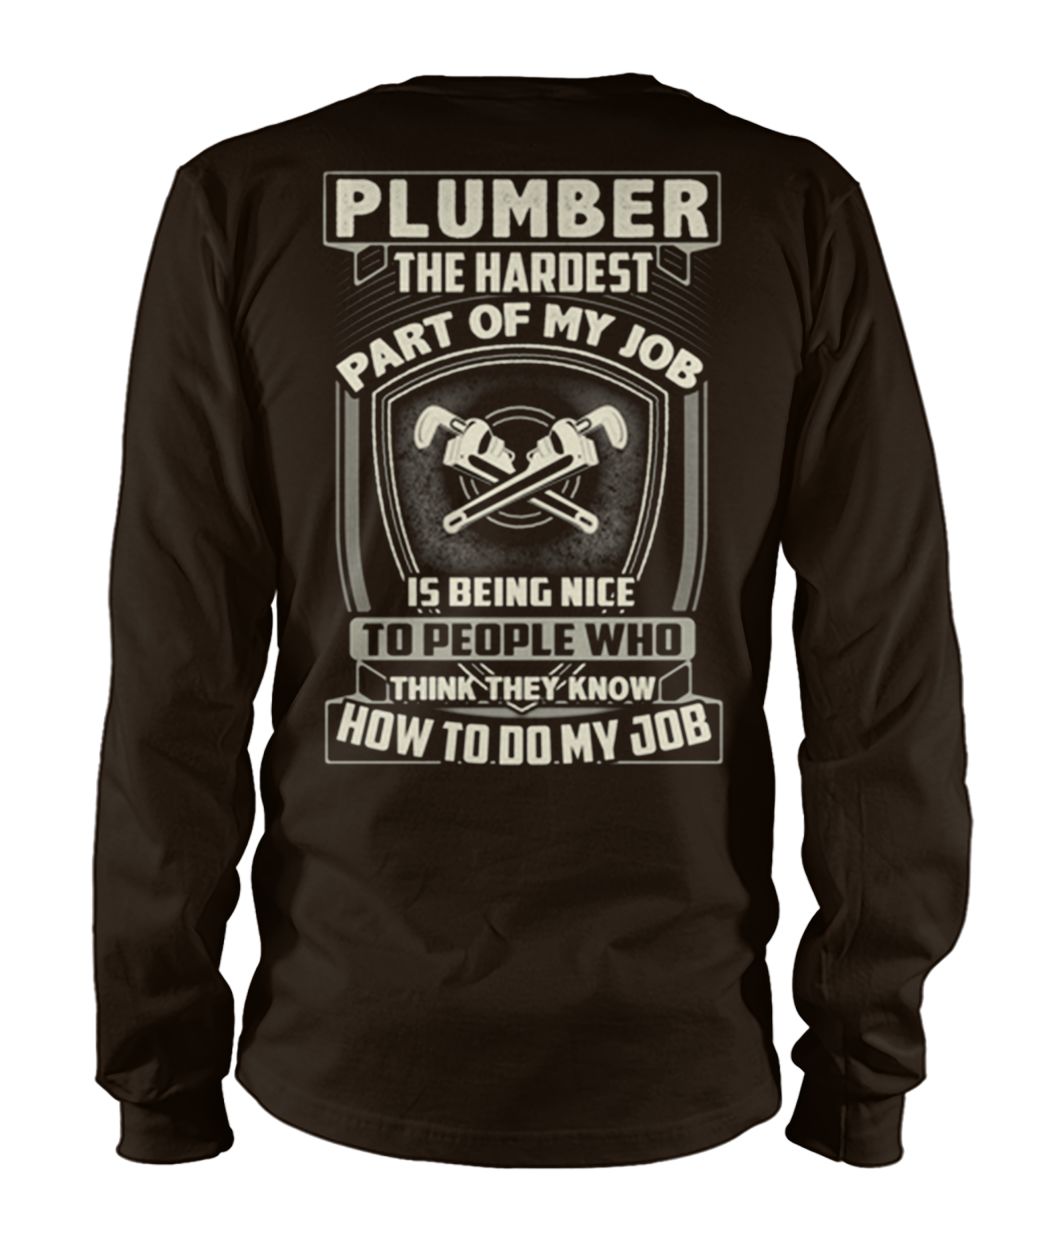 Plumber the hardest part of my job is being nice unisex long sleeve